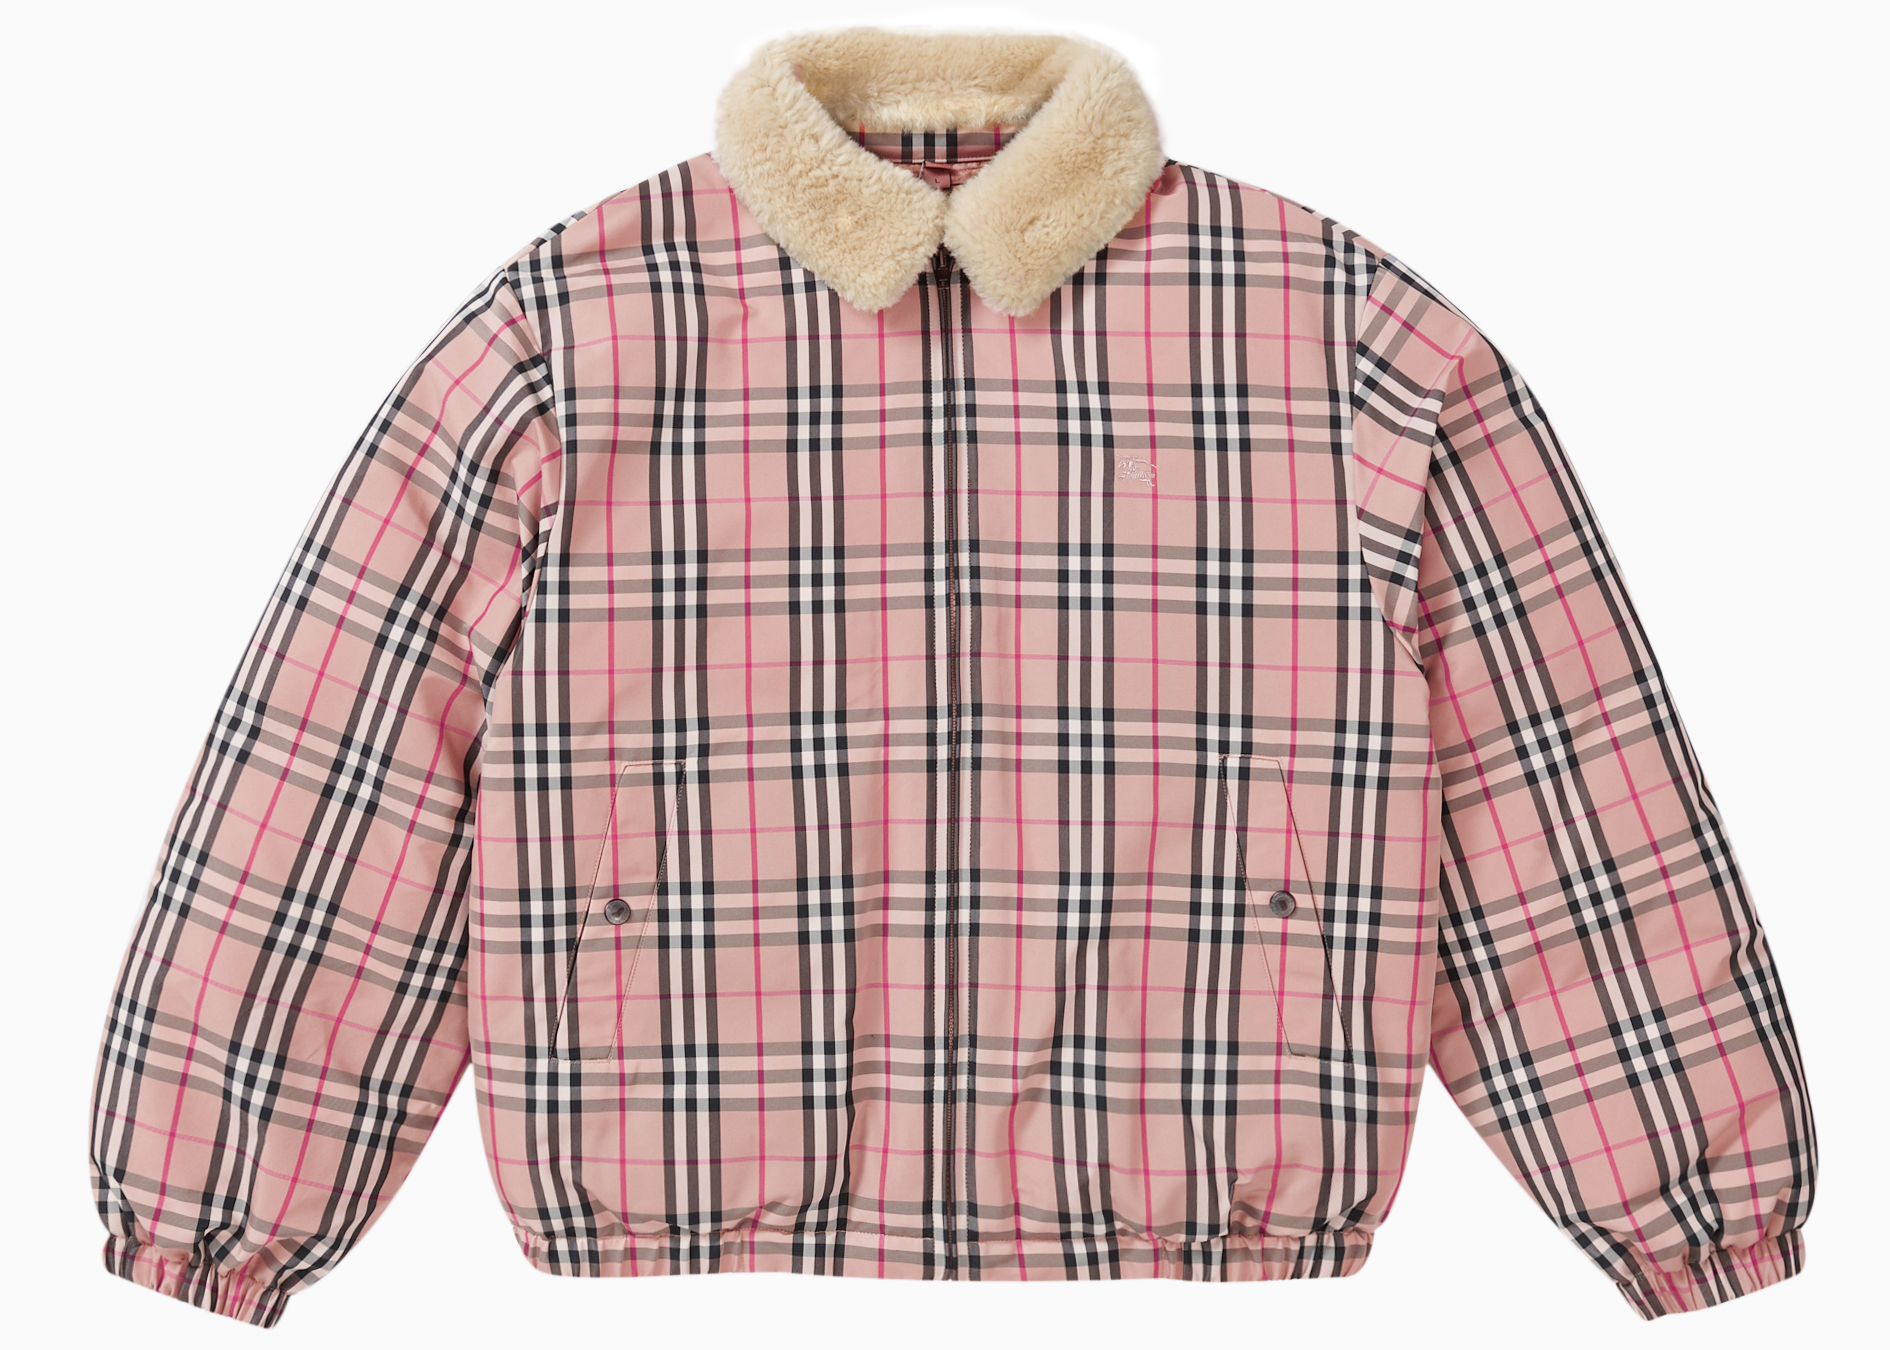 Supreme Burberry Shearling Collar Down Puffer Jacket Pink